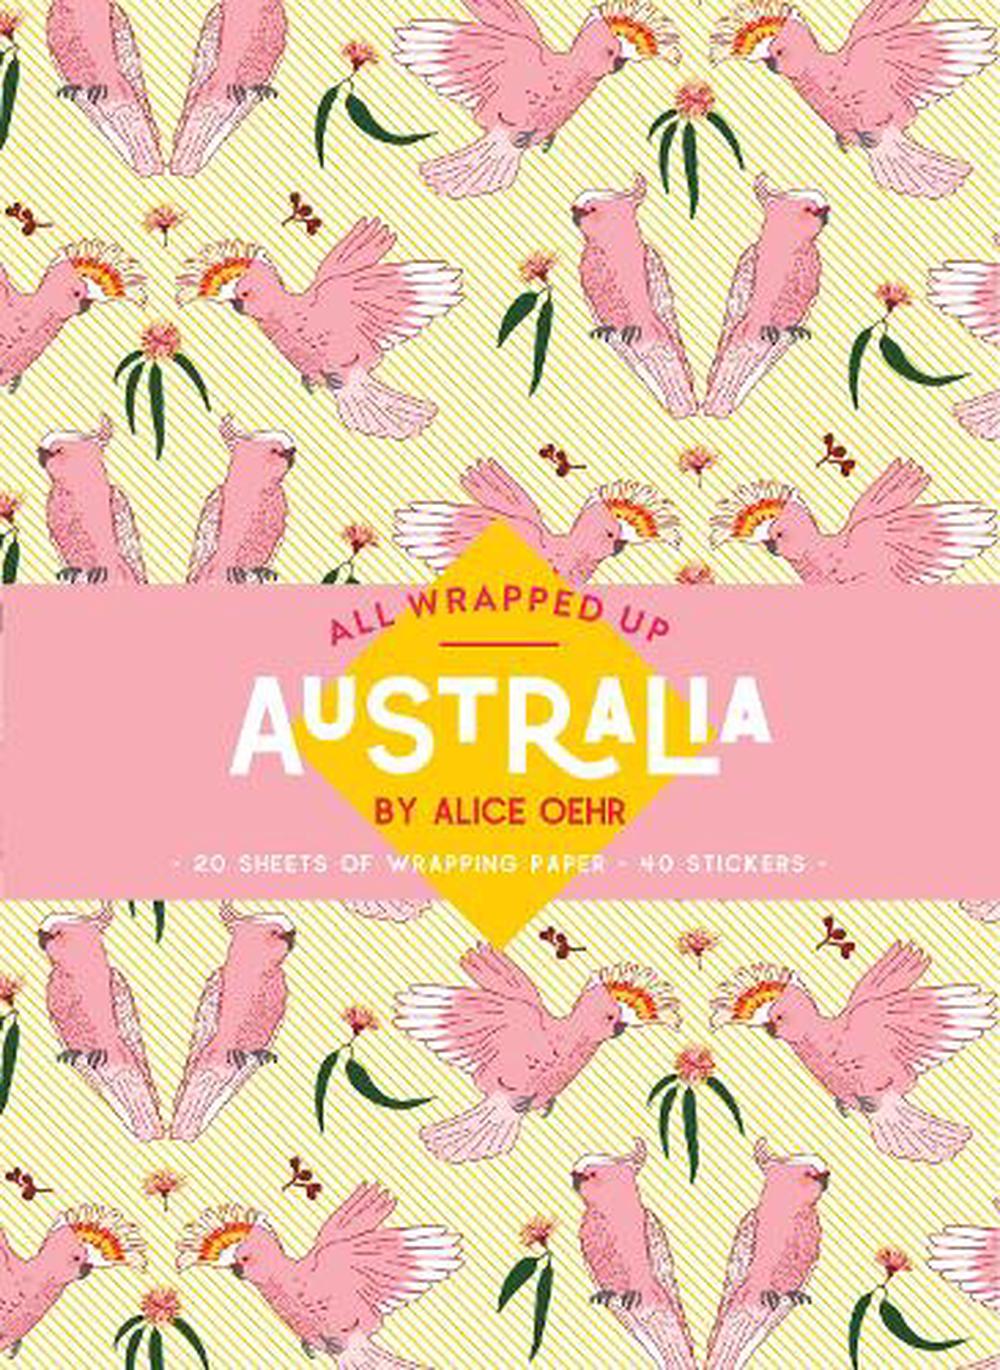 All wrapped up - Australia by Alice Oehr